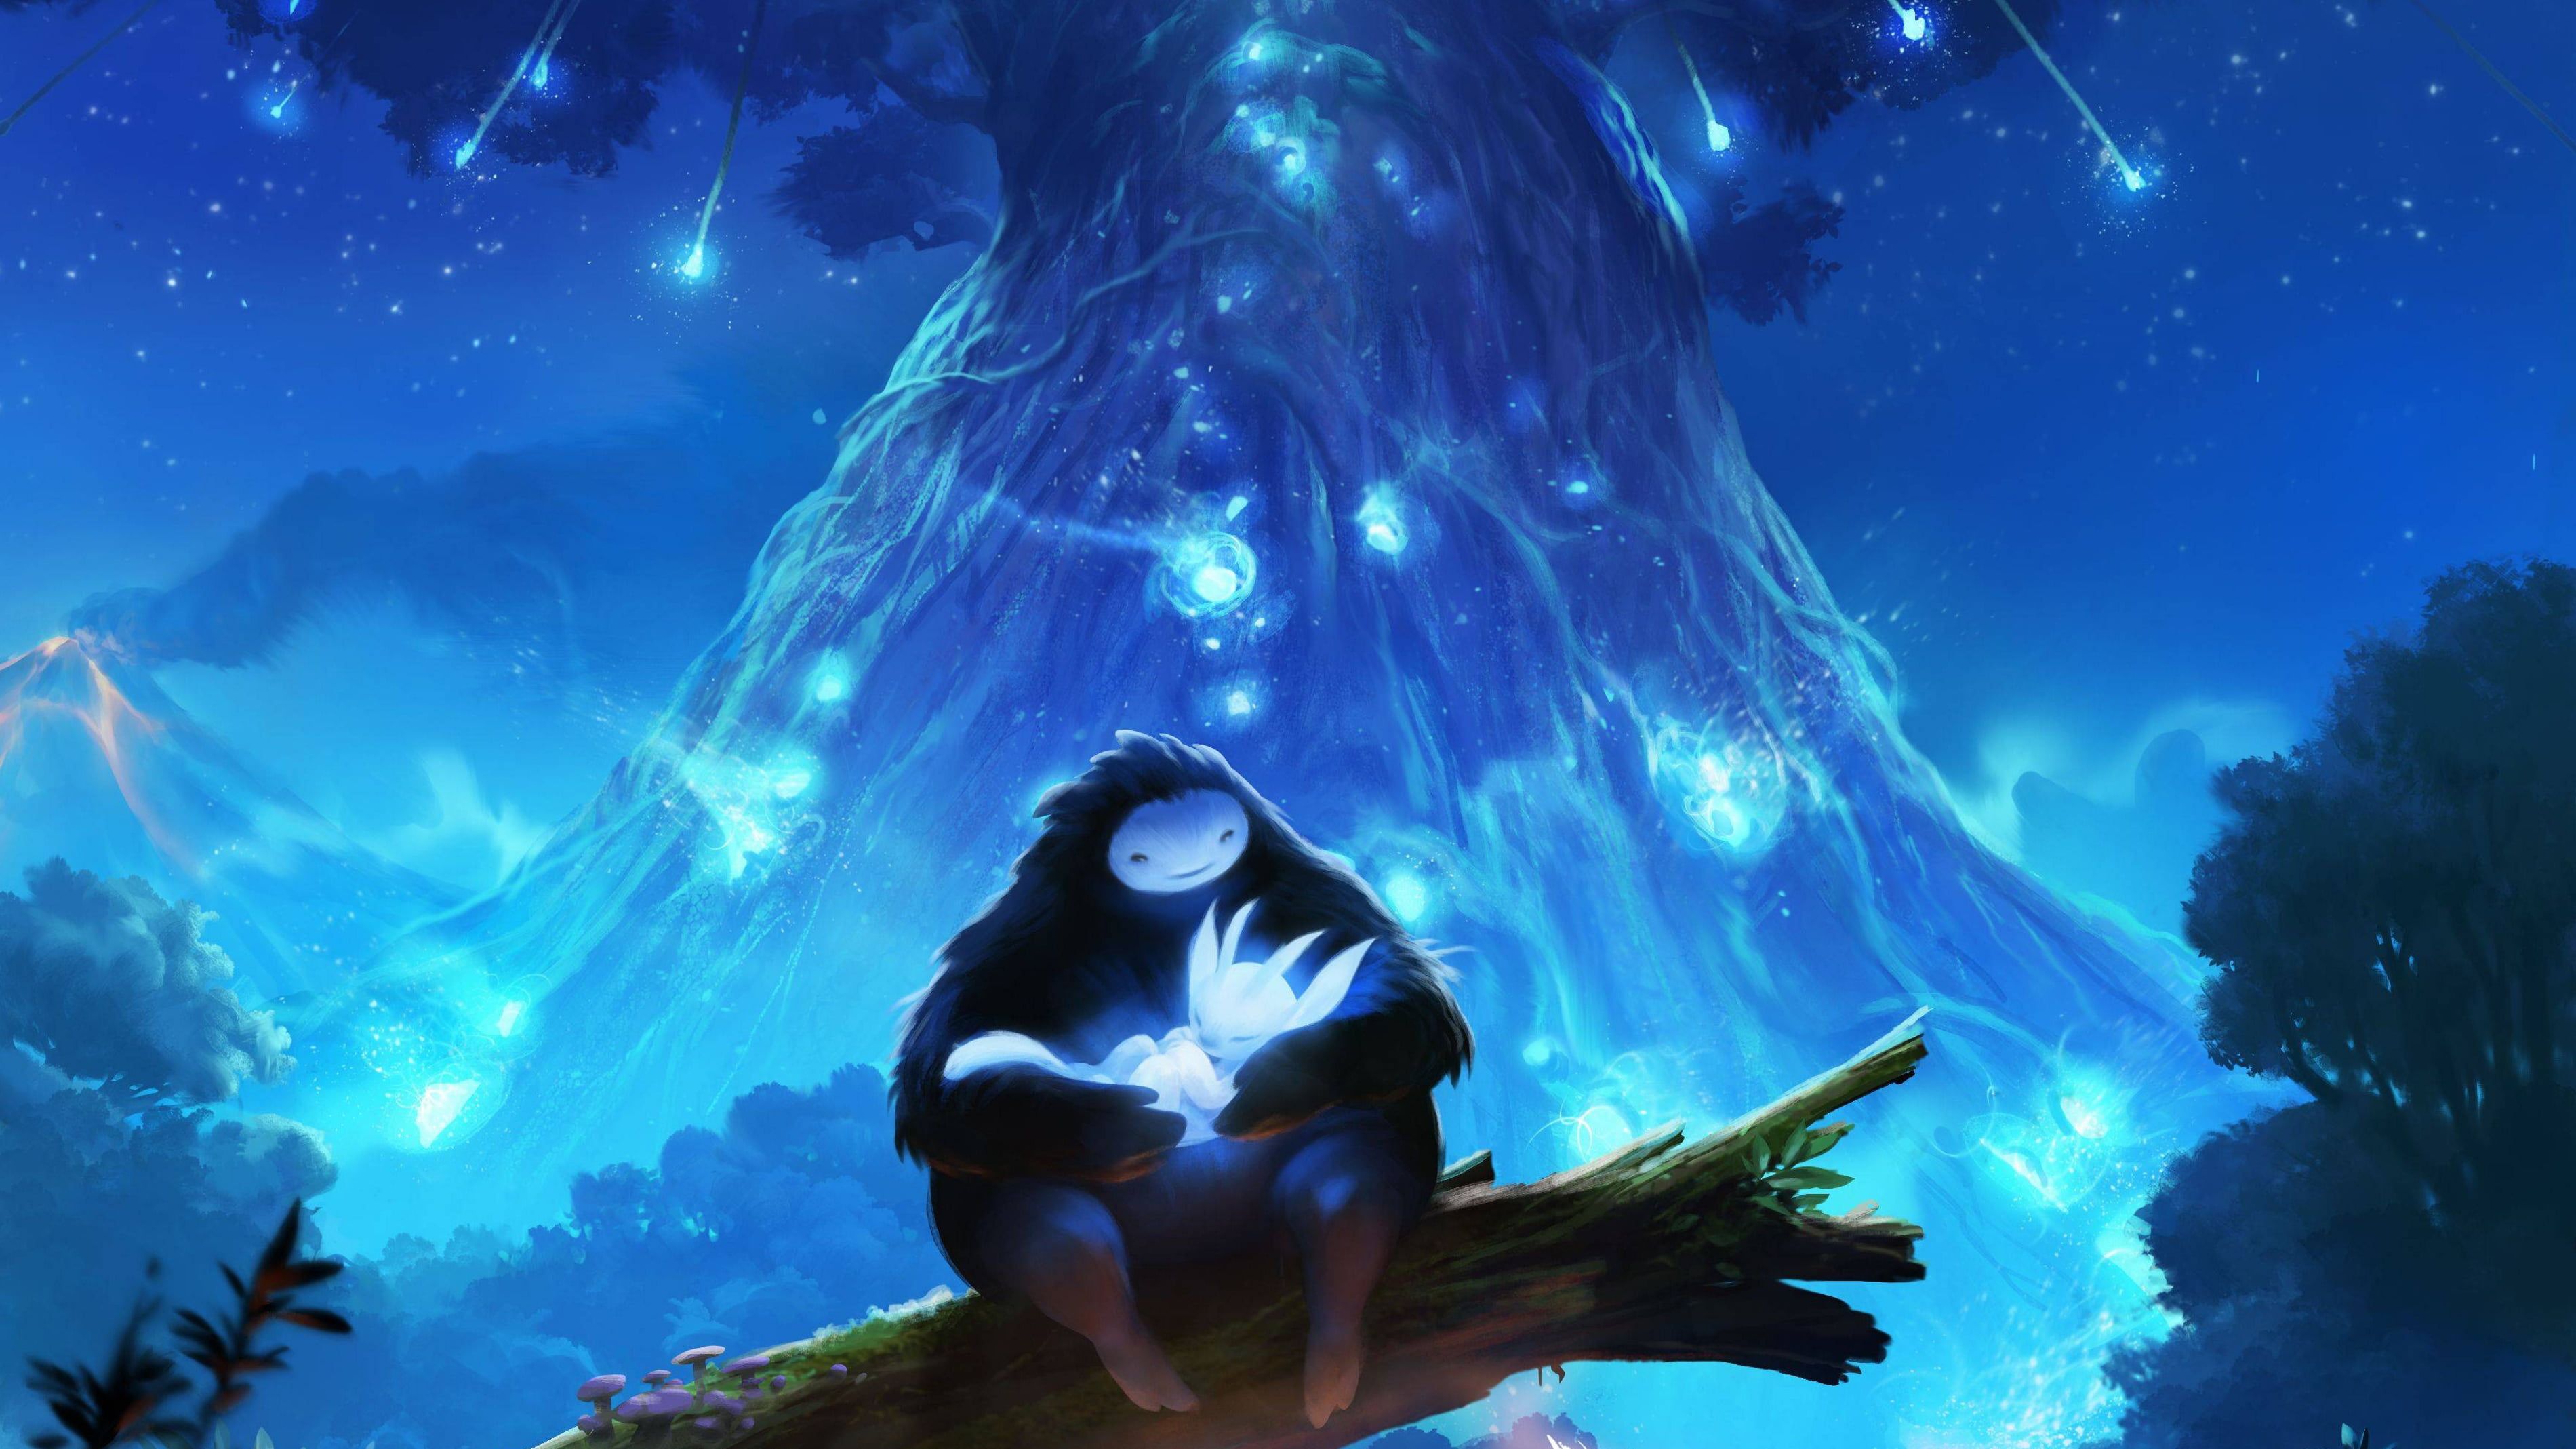 Animated animal character sitting on tree trunk with glowing